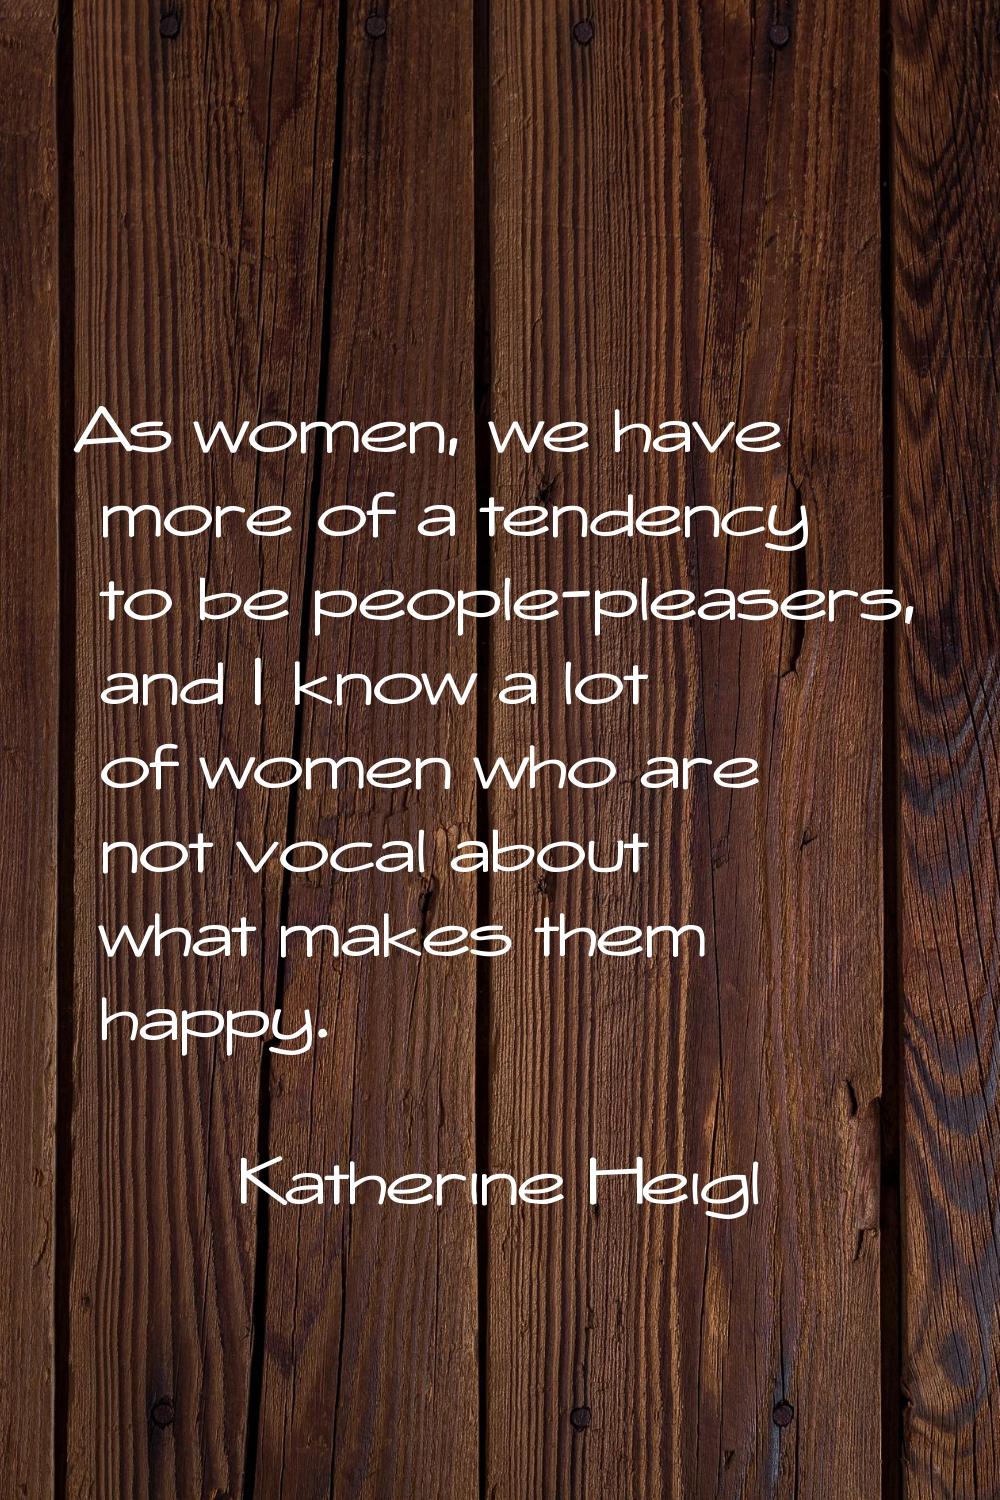 As women, we have more of a tendency to be people-pleasers, and I know a lot of women who are not v